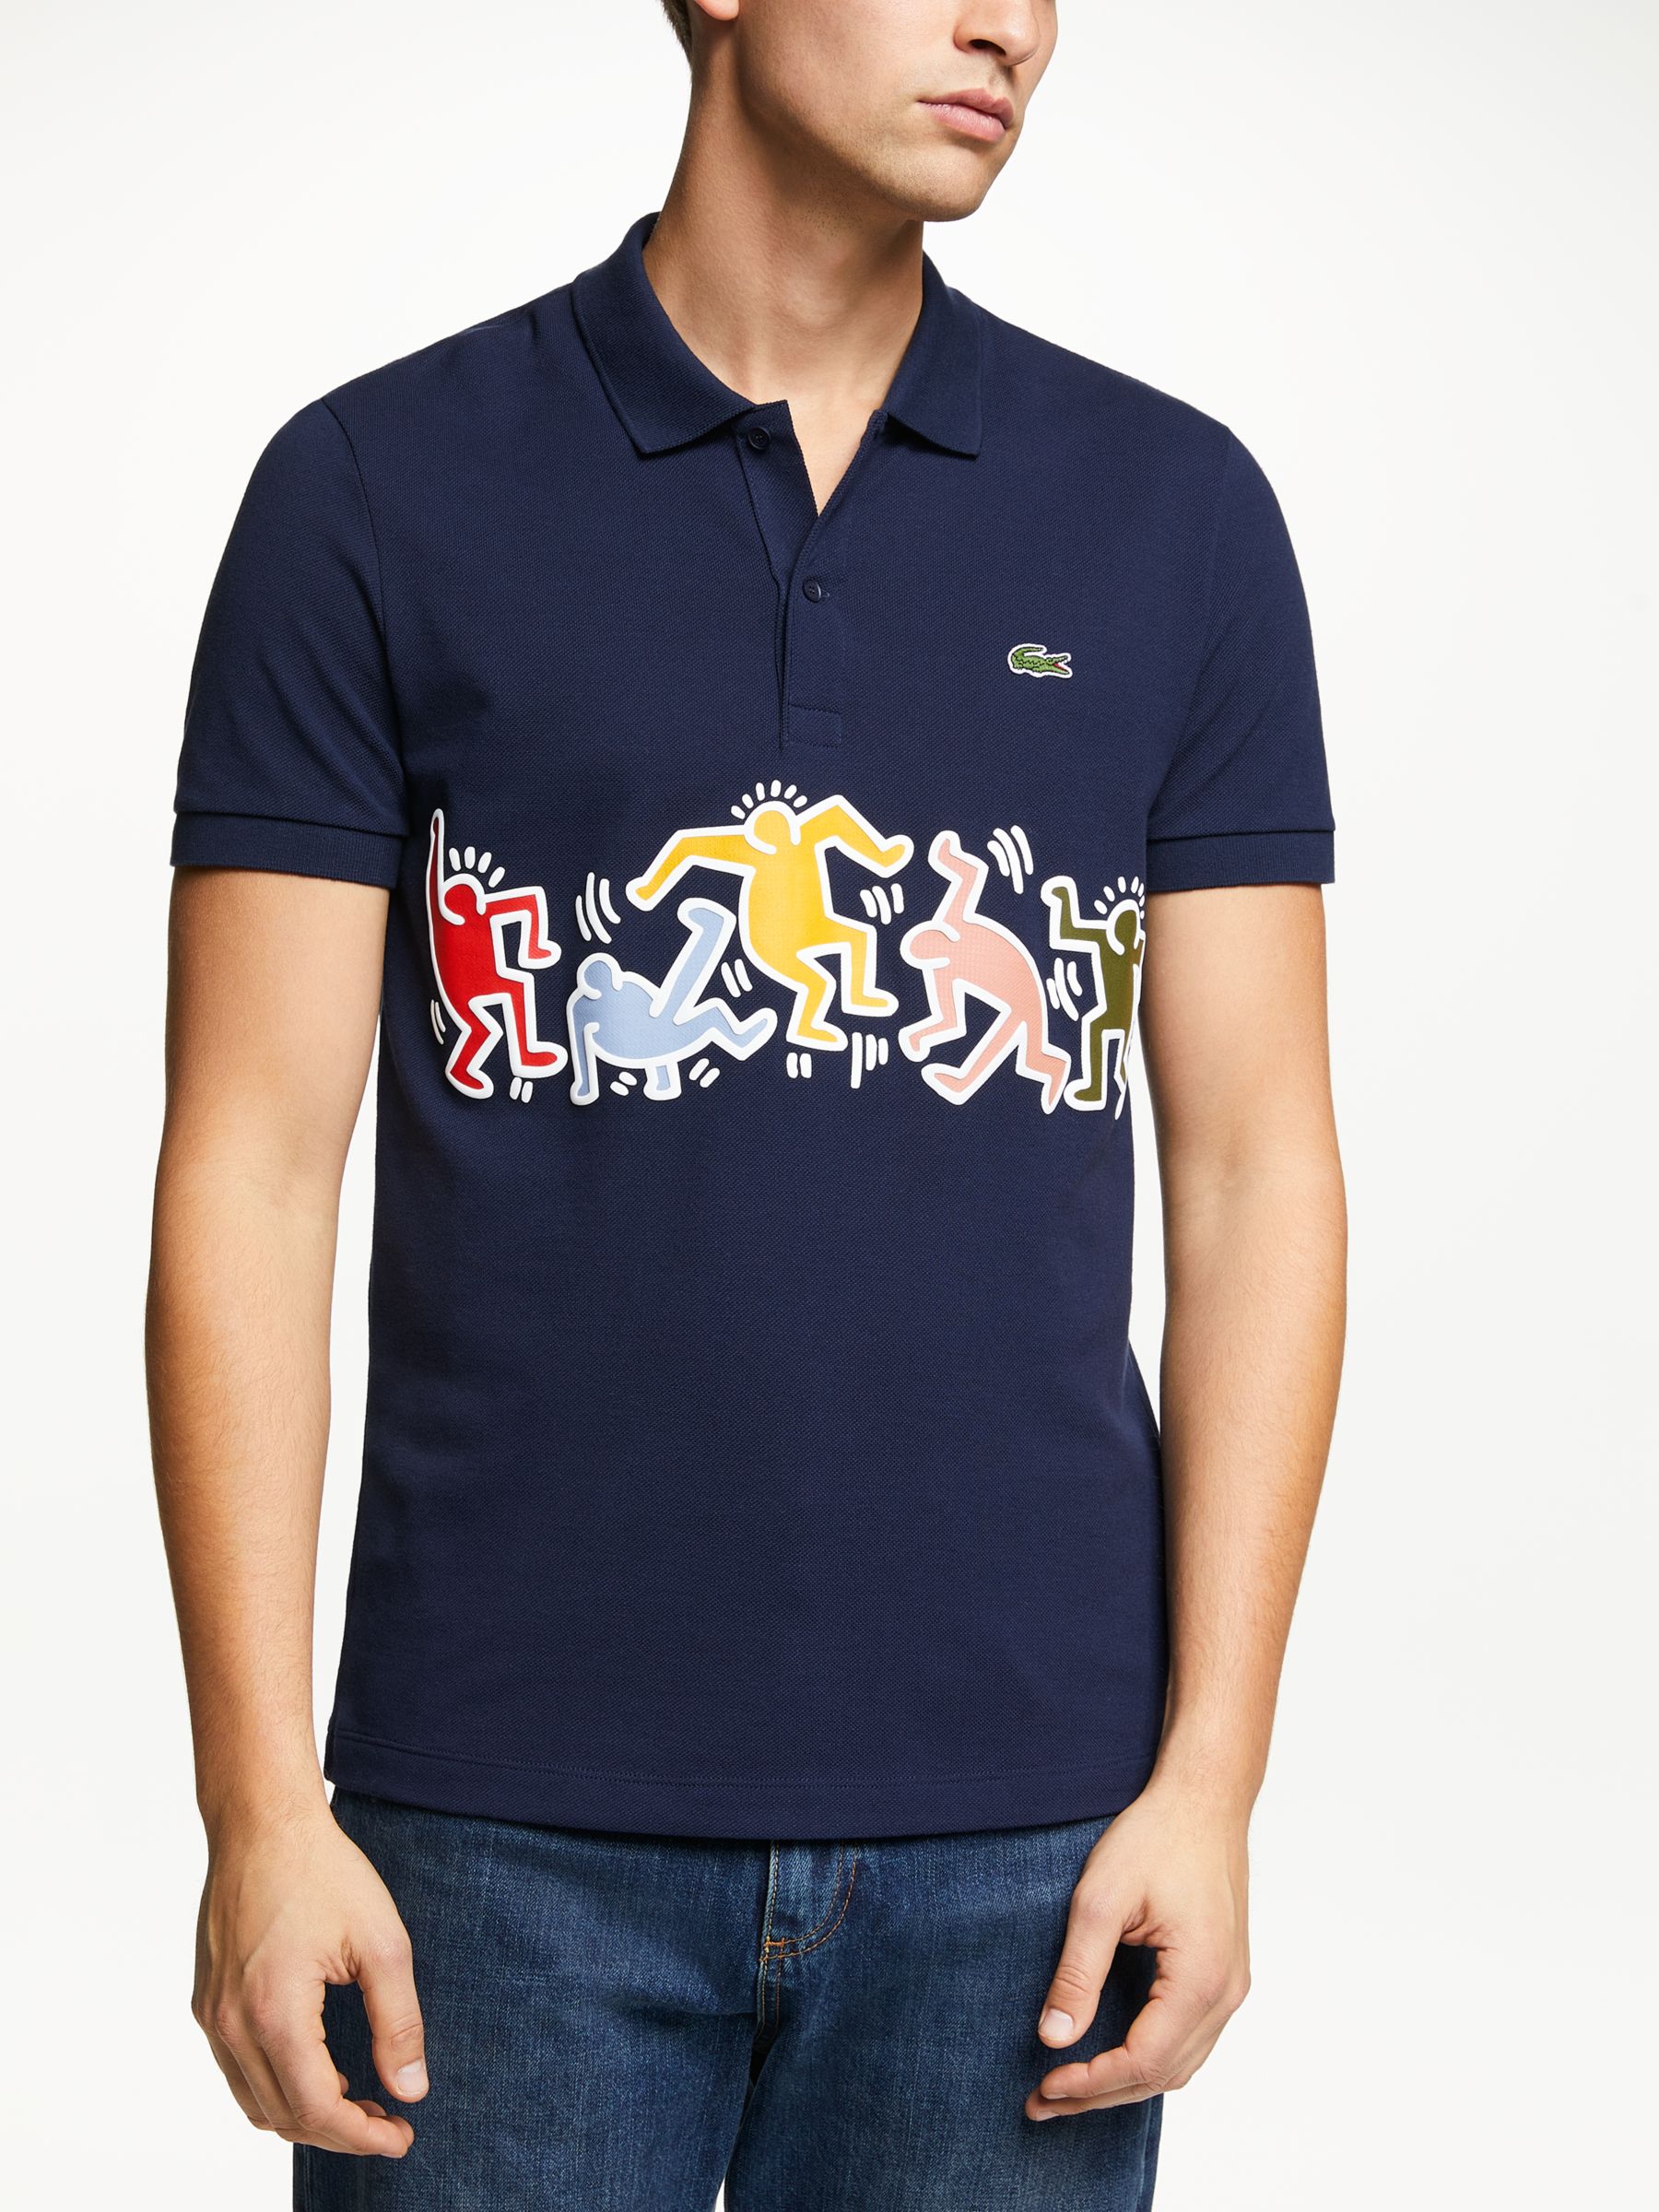 lacoste keith haring uk